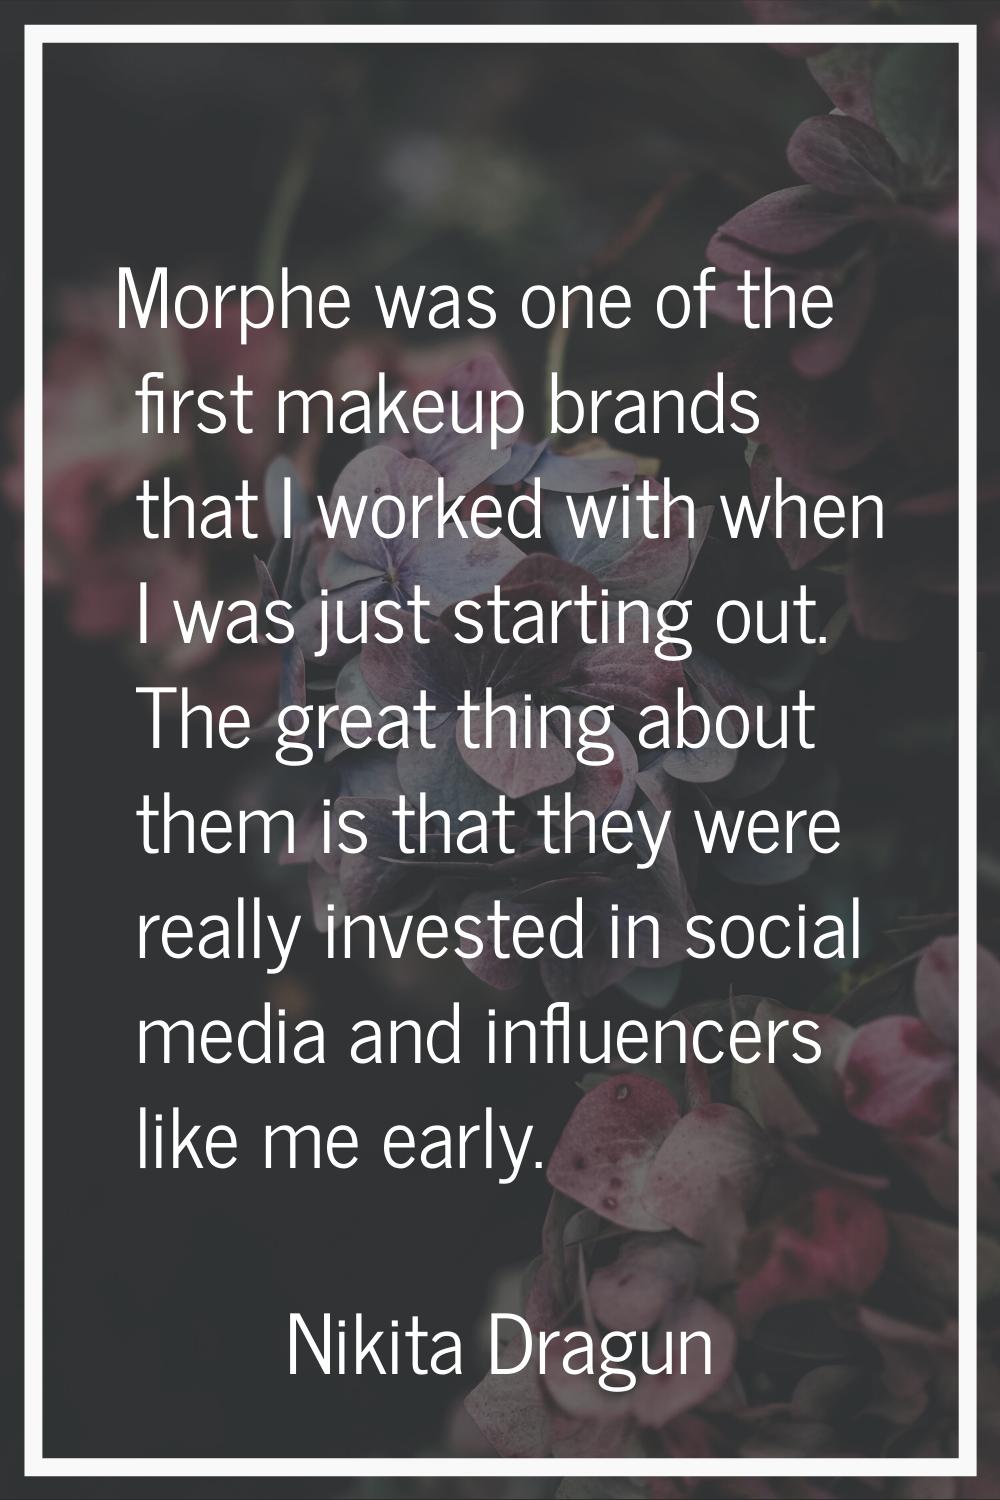 Morphe was one of the first makeup brands that I worked with when I was just starting out. The grea